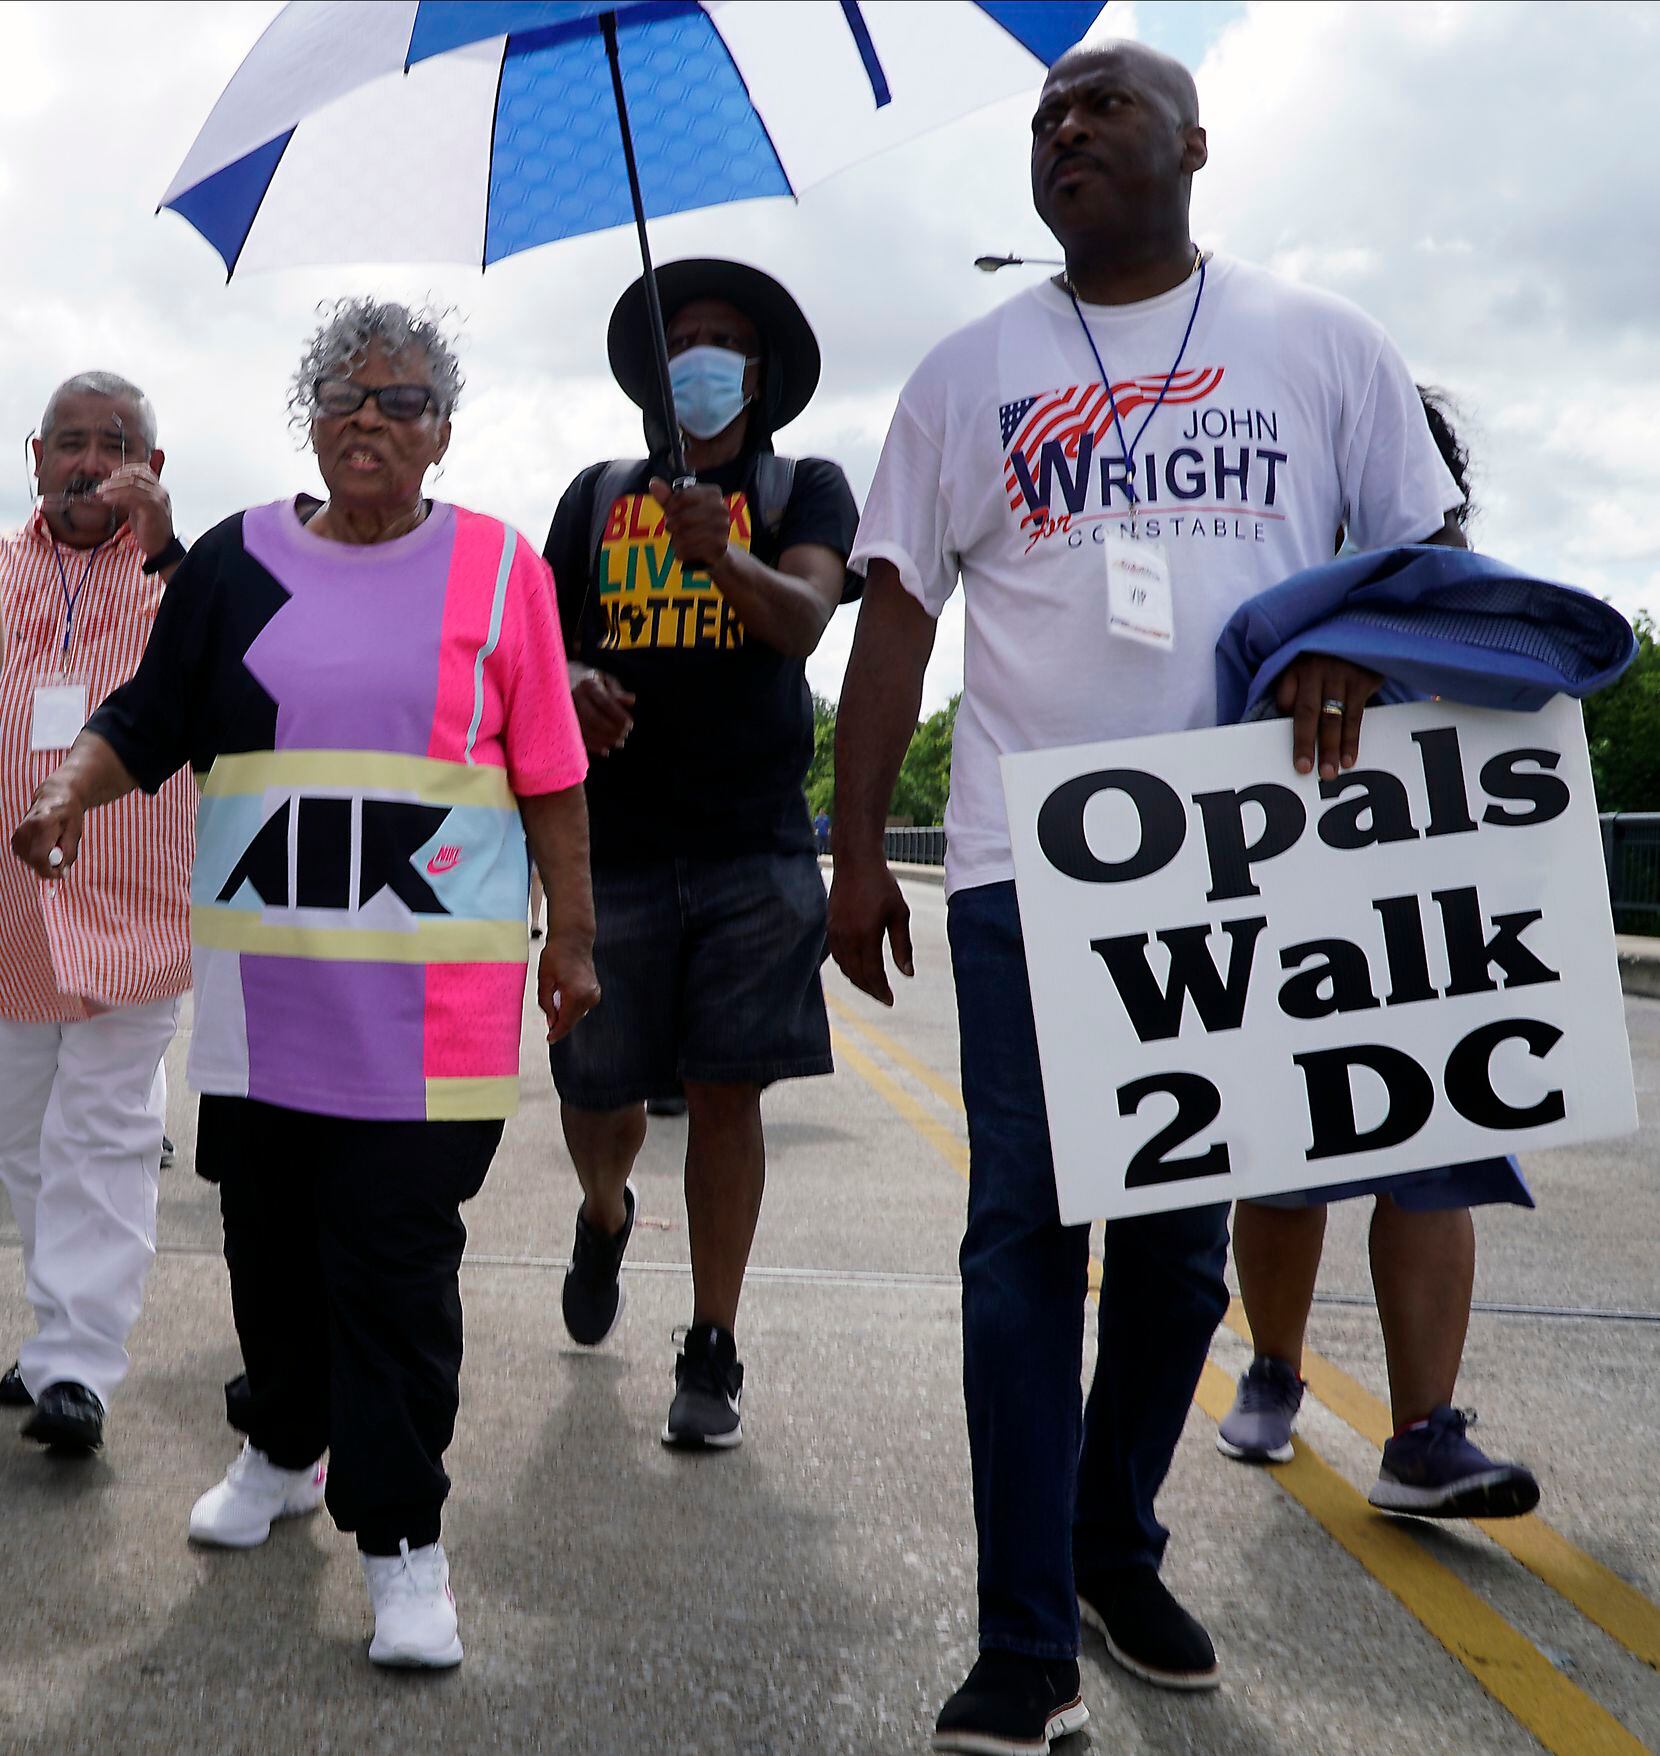 Ninety-three year old  activist Opal Lee marched 2.5 miles as part of her campaign to make Juneteenth a national holiday on Friday, June 19, 2020.